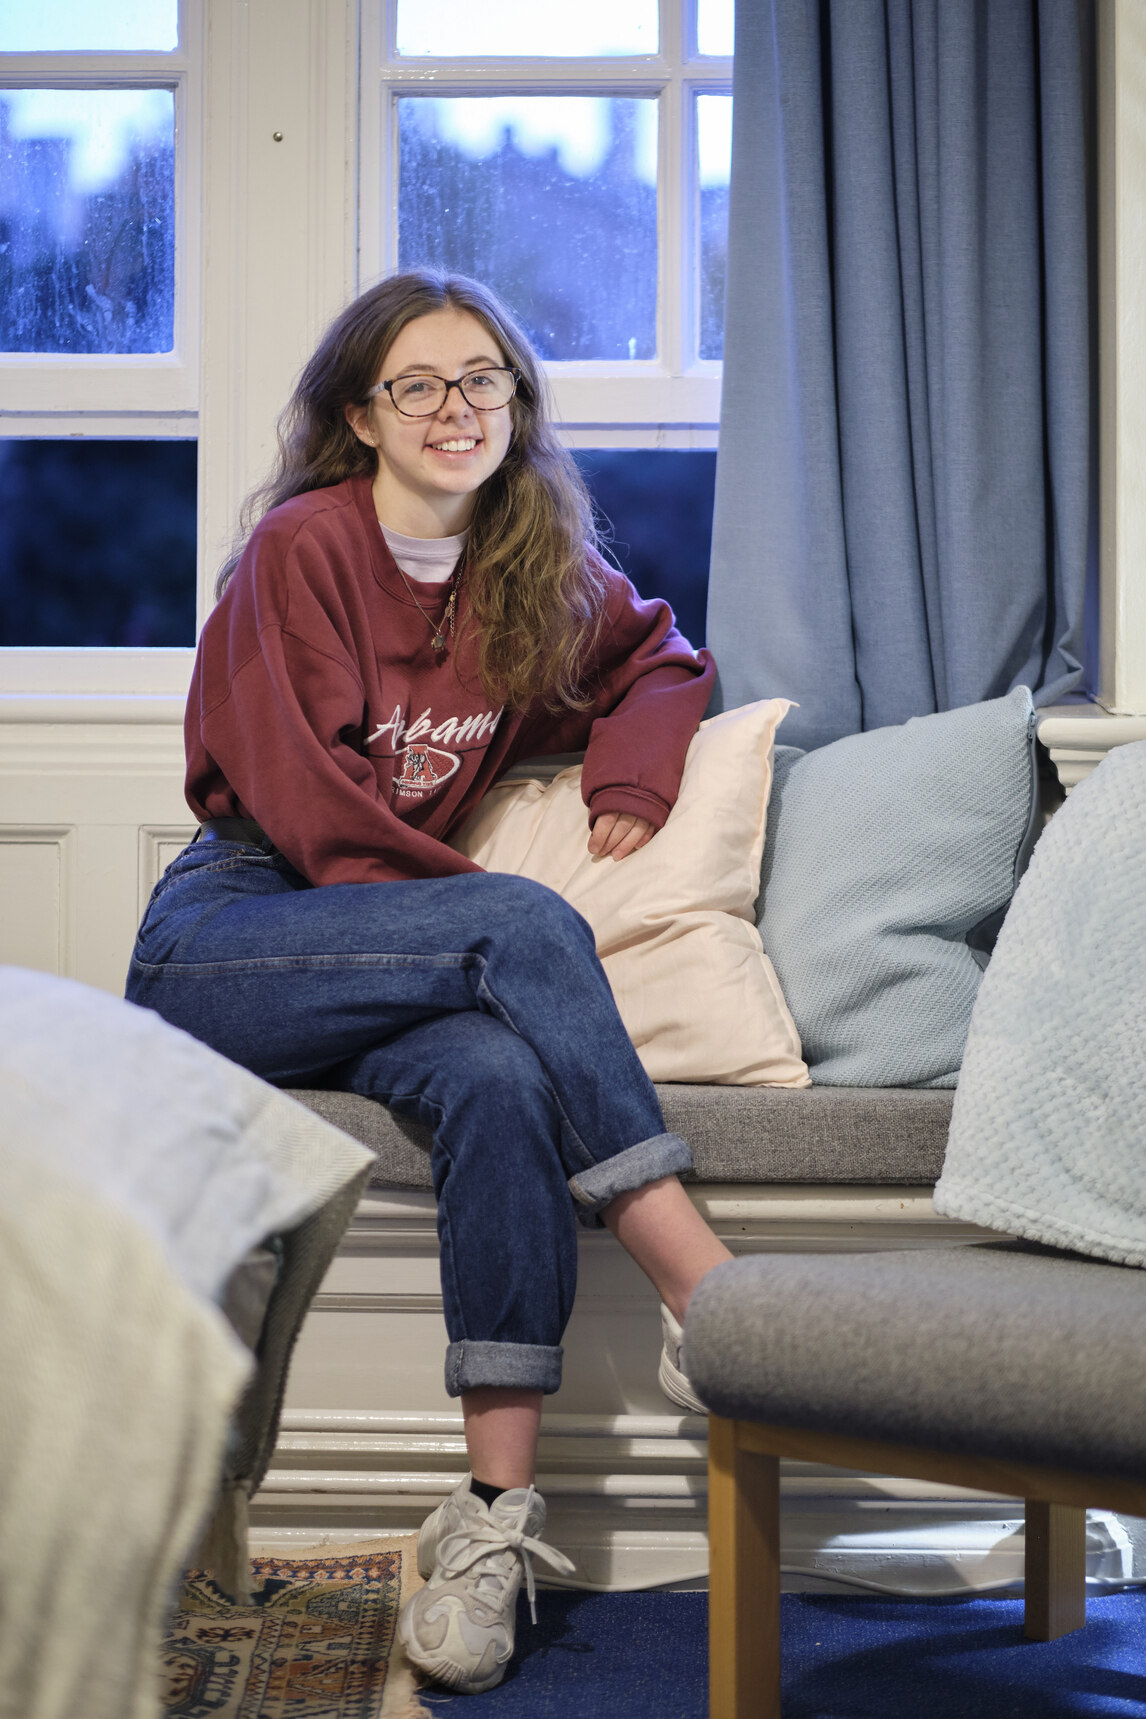 Student sat in bay window with cushions